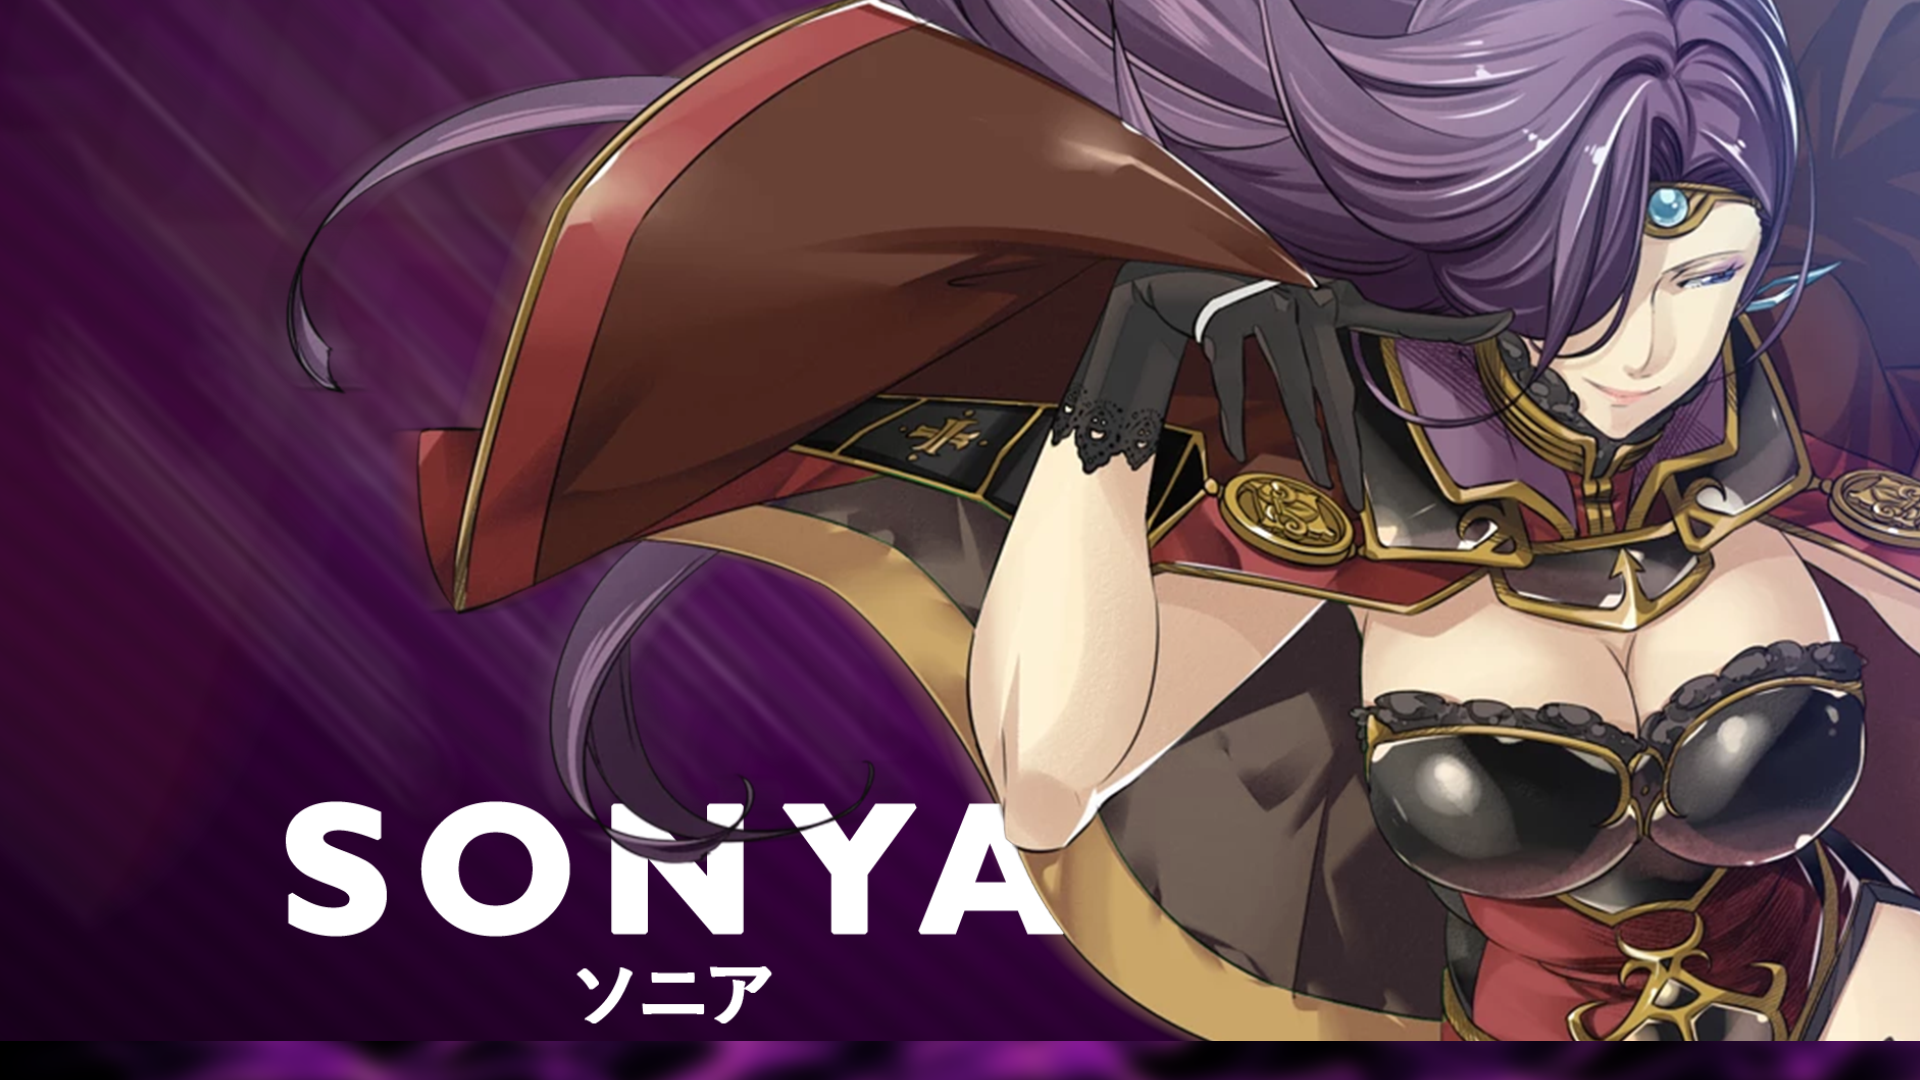 Another Wallpaper I made Sonya this time 1920x1080 fireemblem